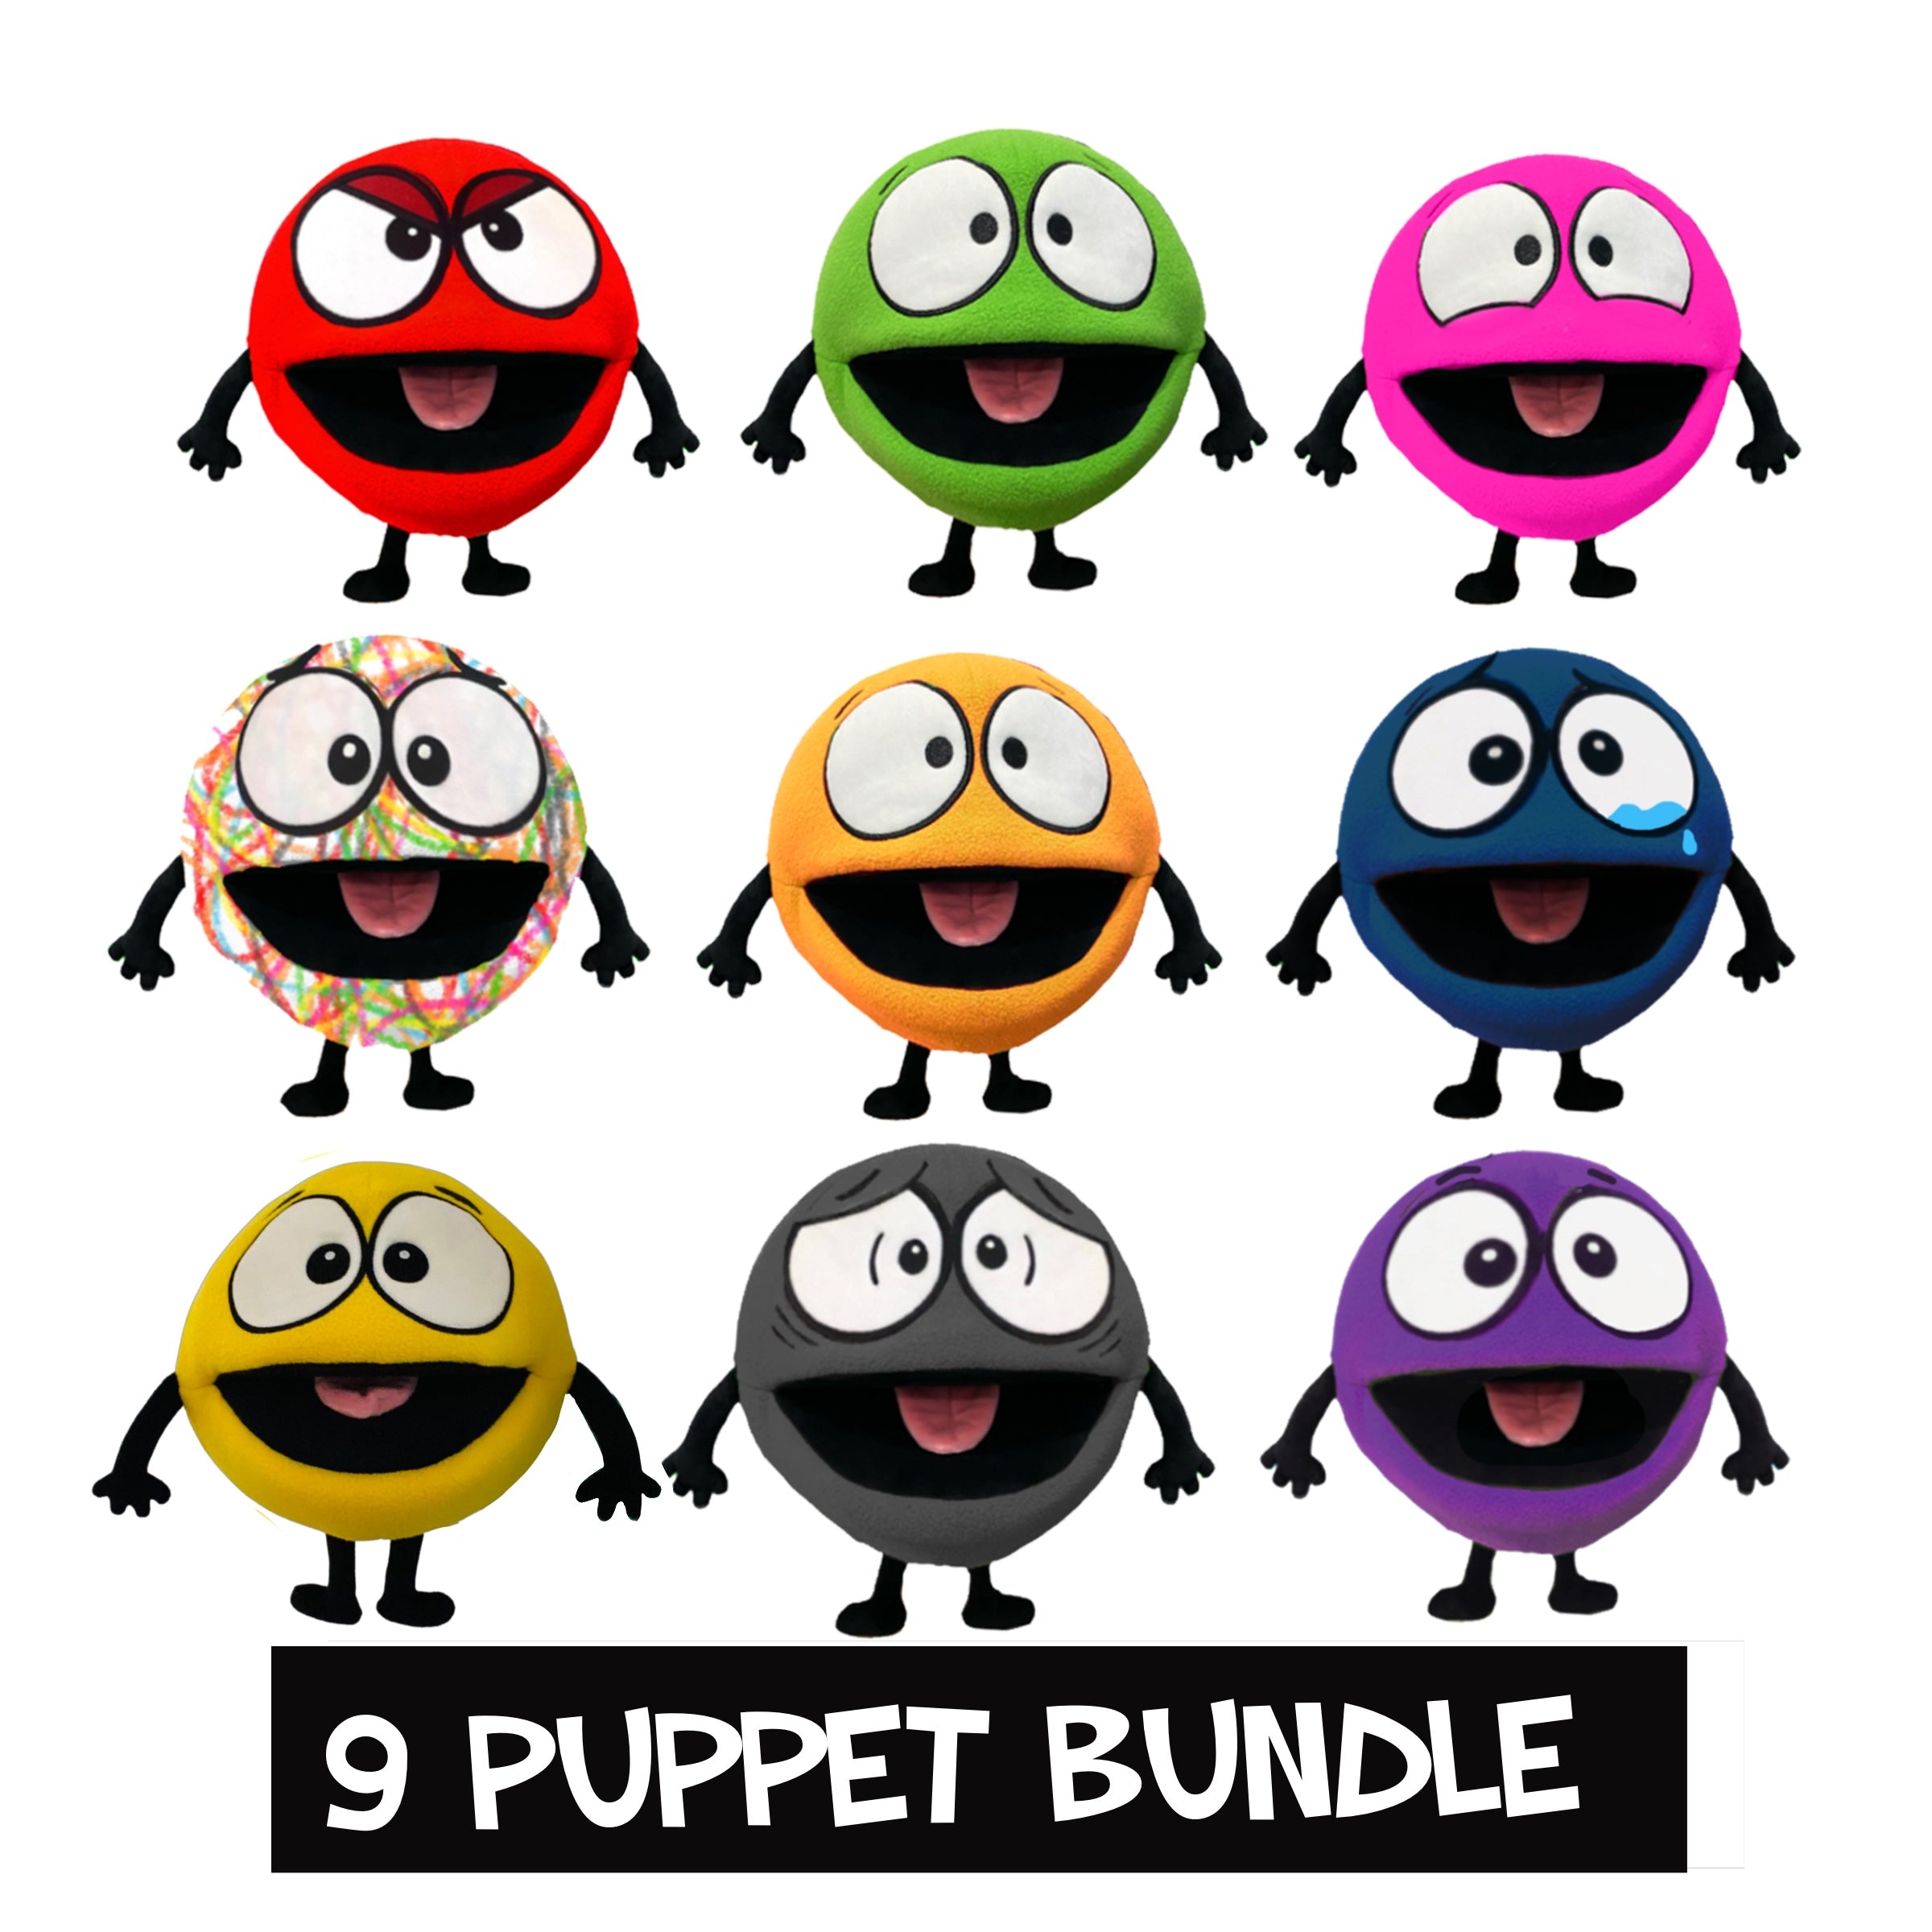 BUNDLE 9 PUPPETS (Peaceful, Scribble, Happiness, Love, Anger